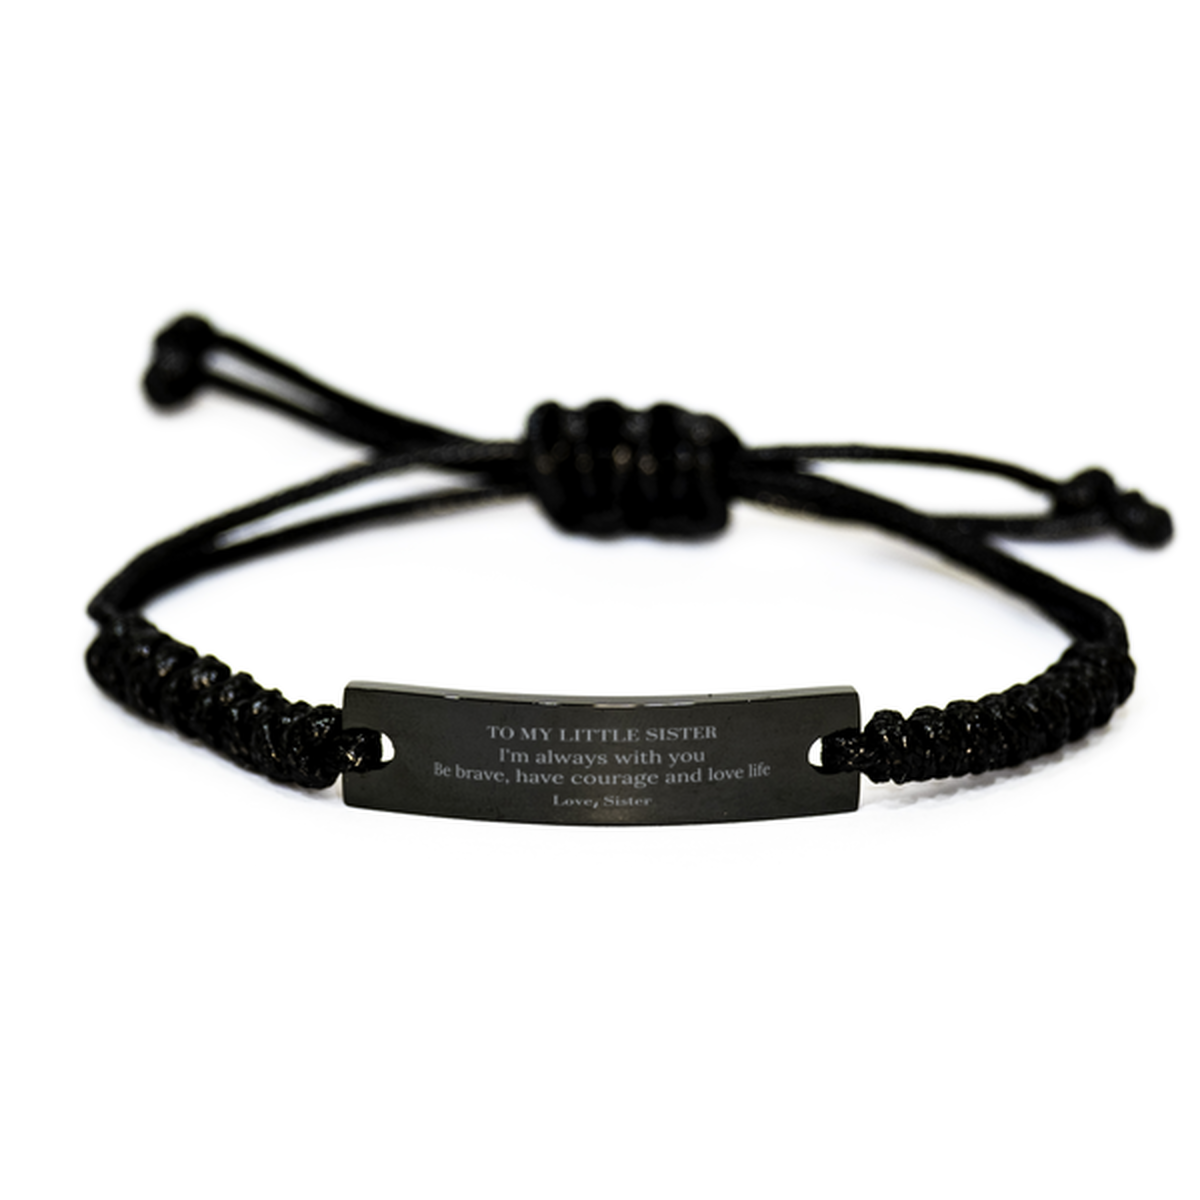 To My Little Sister Gifts from Sister, Unique Black Rope Bracelet Inspirational Christmas Birthday Graduation Gifts for Little Sister I'm always with you. Be brave, have courage and love life. Love, Sister